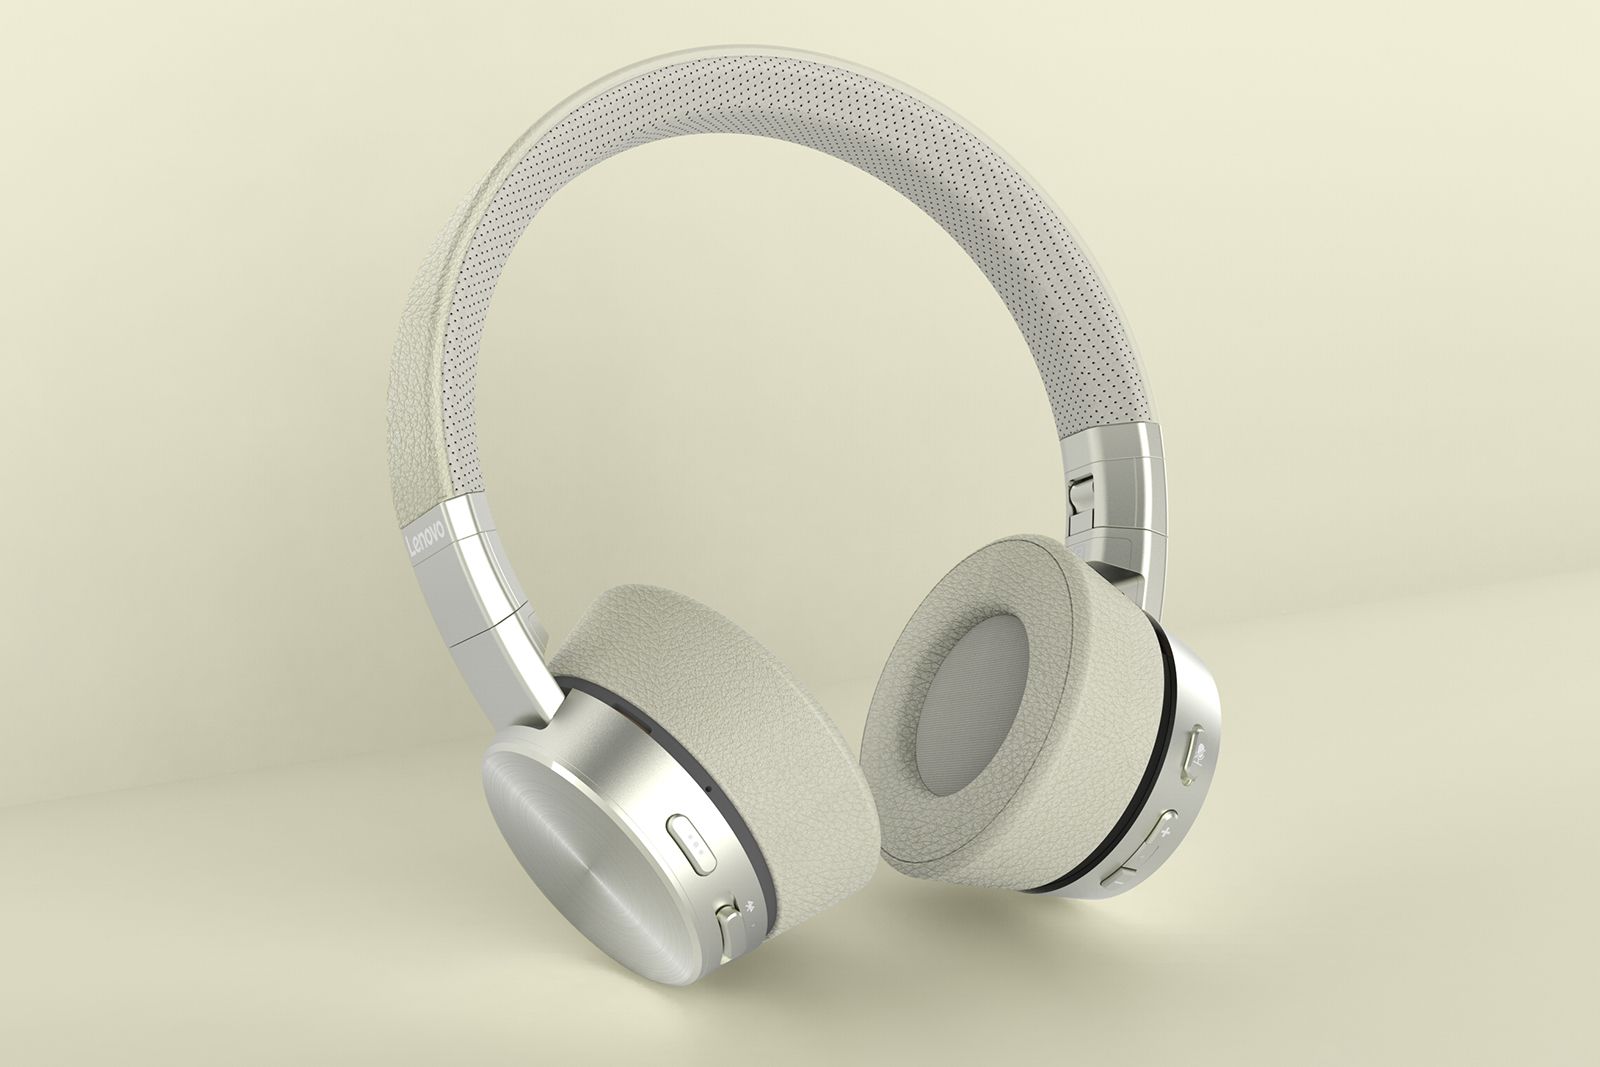 Lenovo Yoga ANC Headphones bring noise cancellation and Dolby tuning for 158 image 1